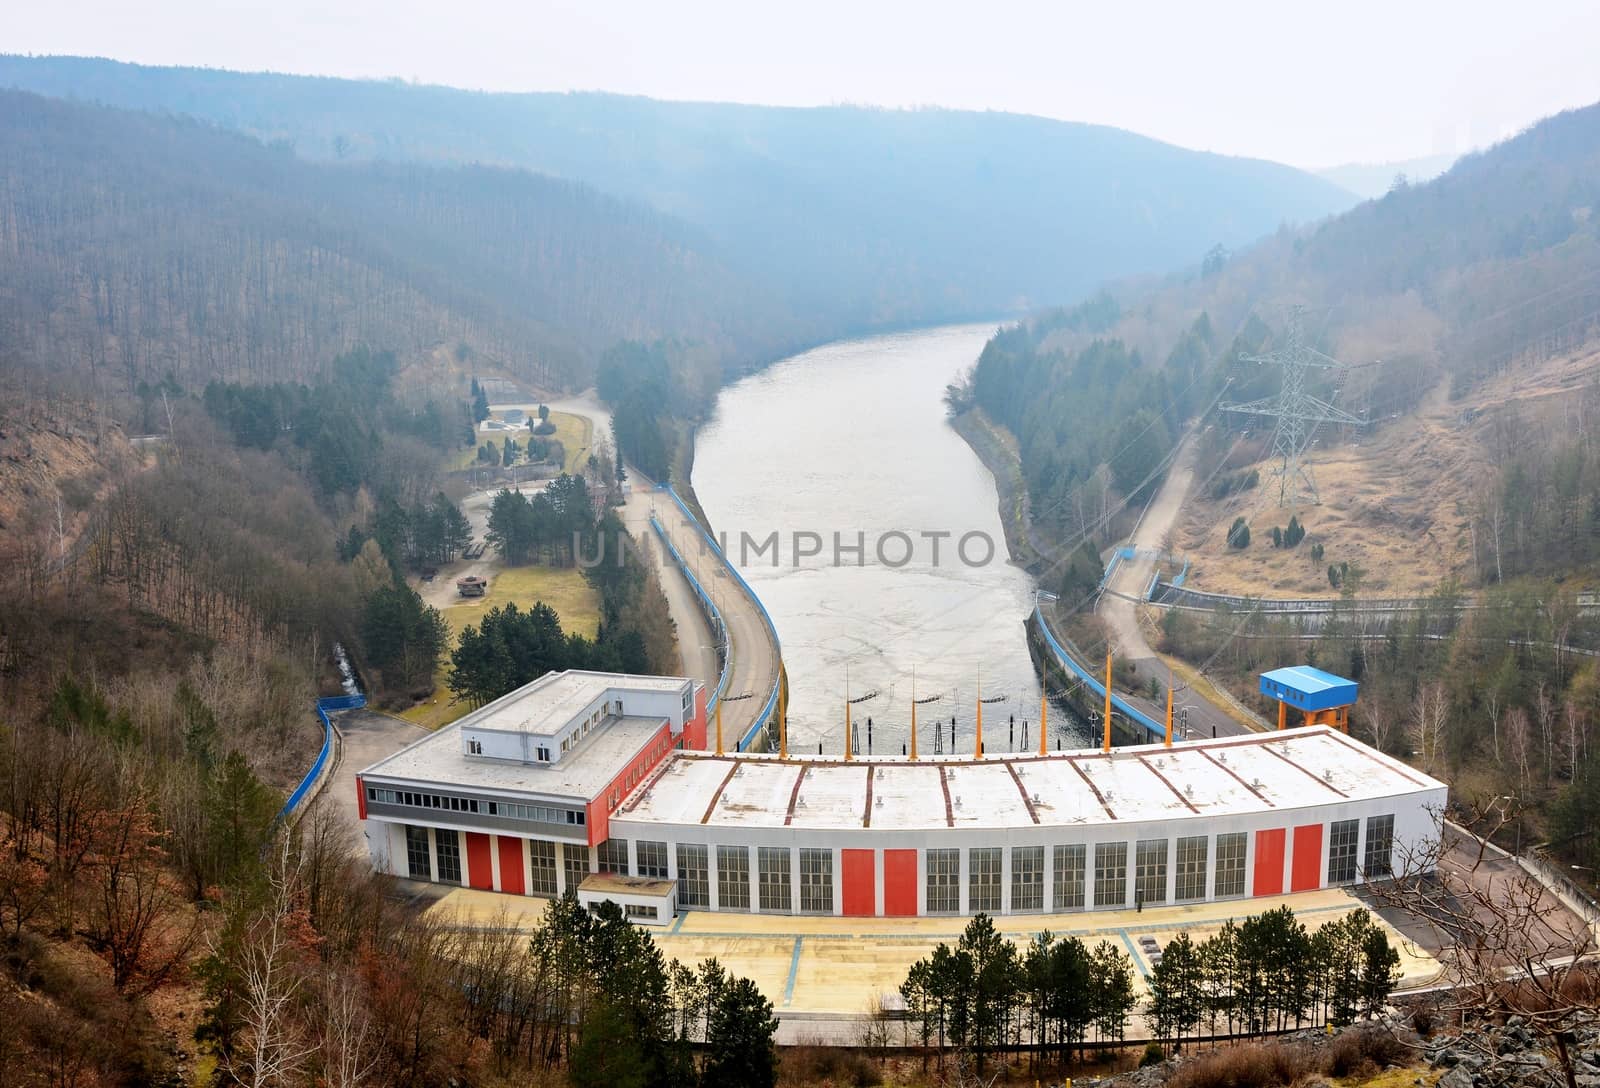 The Above View of a Pumped-Storage Hydroelectric Power Station on the Dalesice Dam.